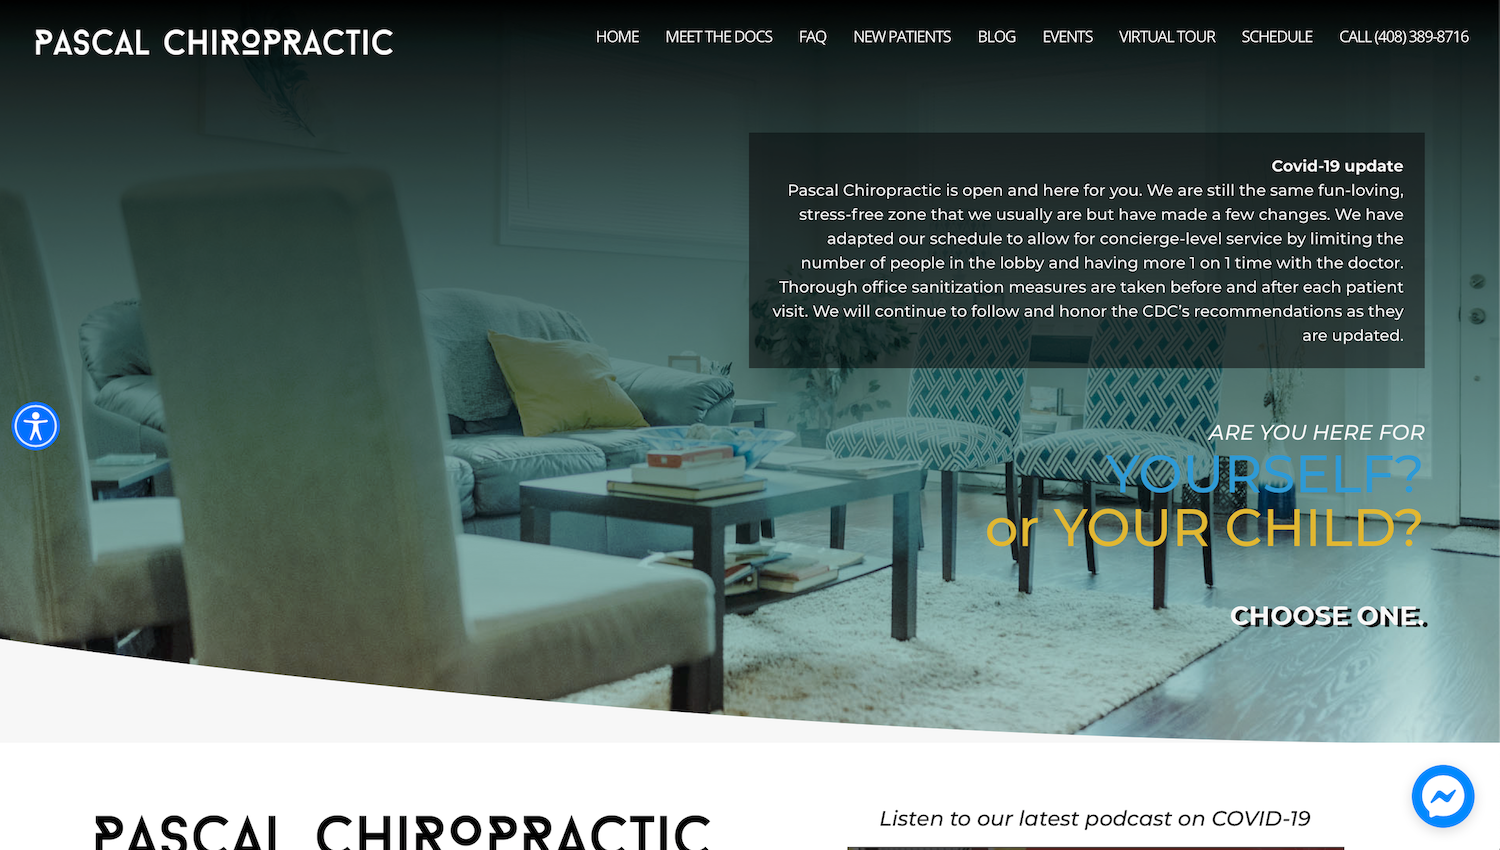 Pascal Chiropractic screenshot of their website home page.